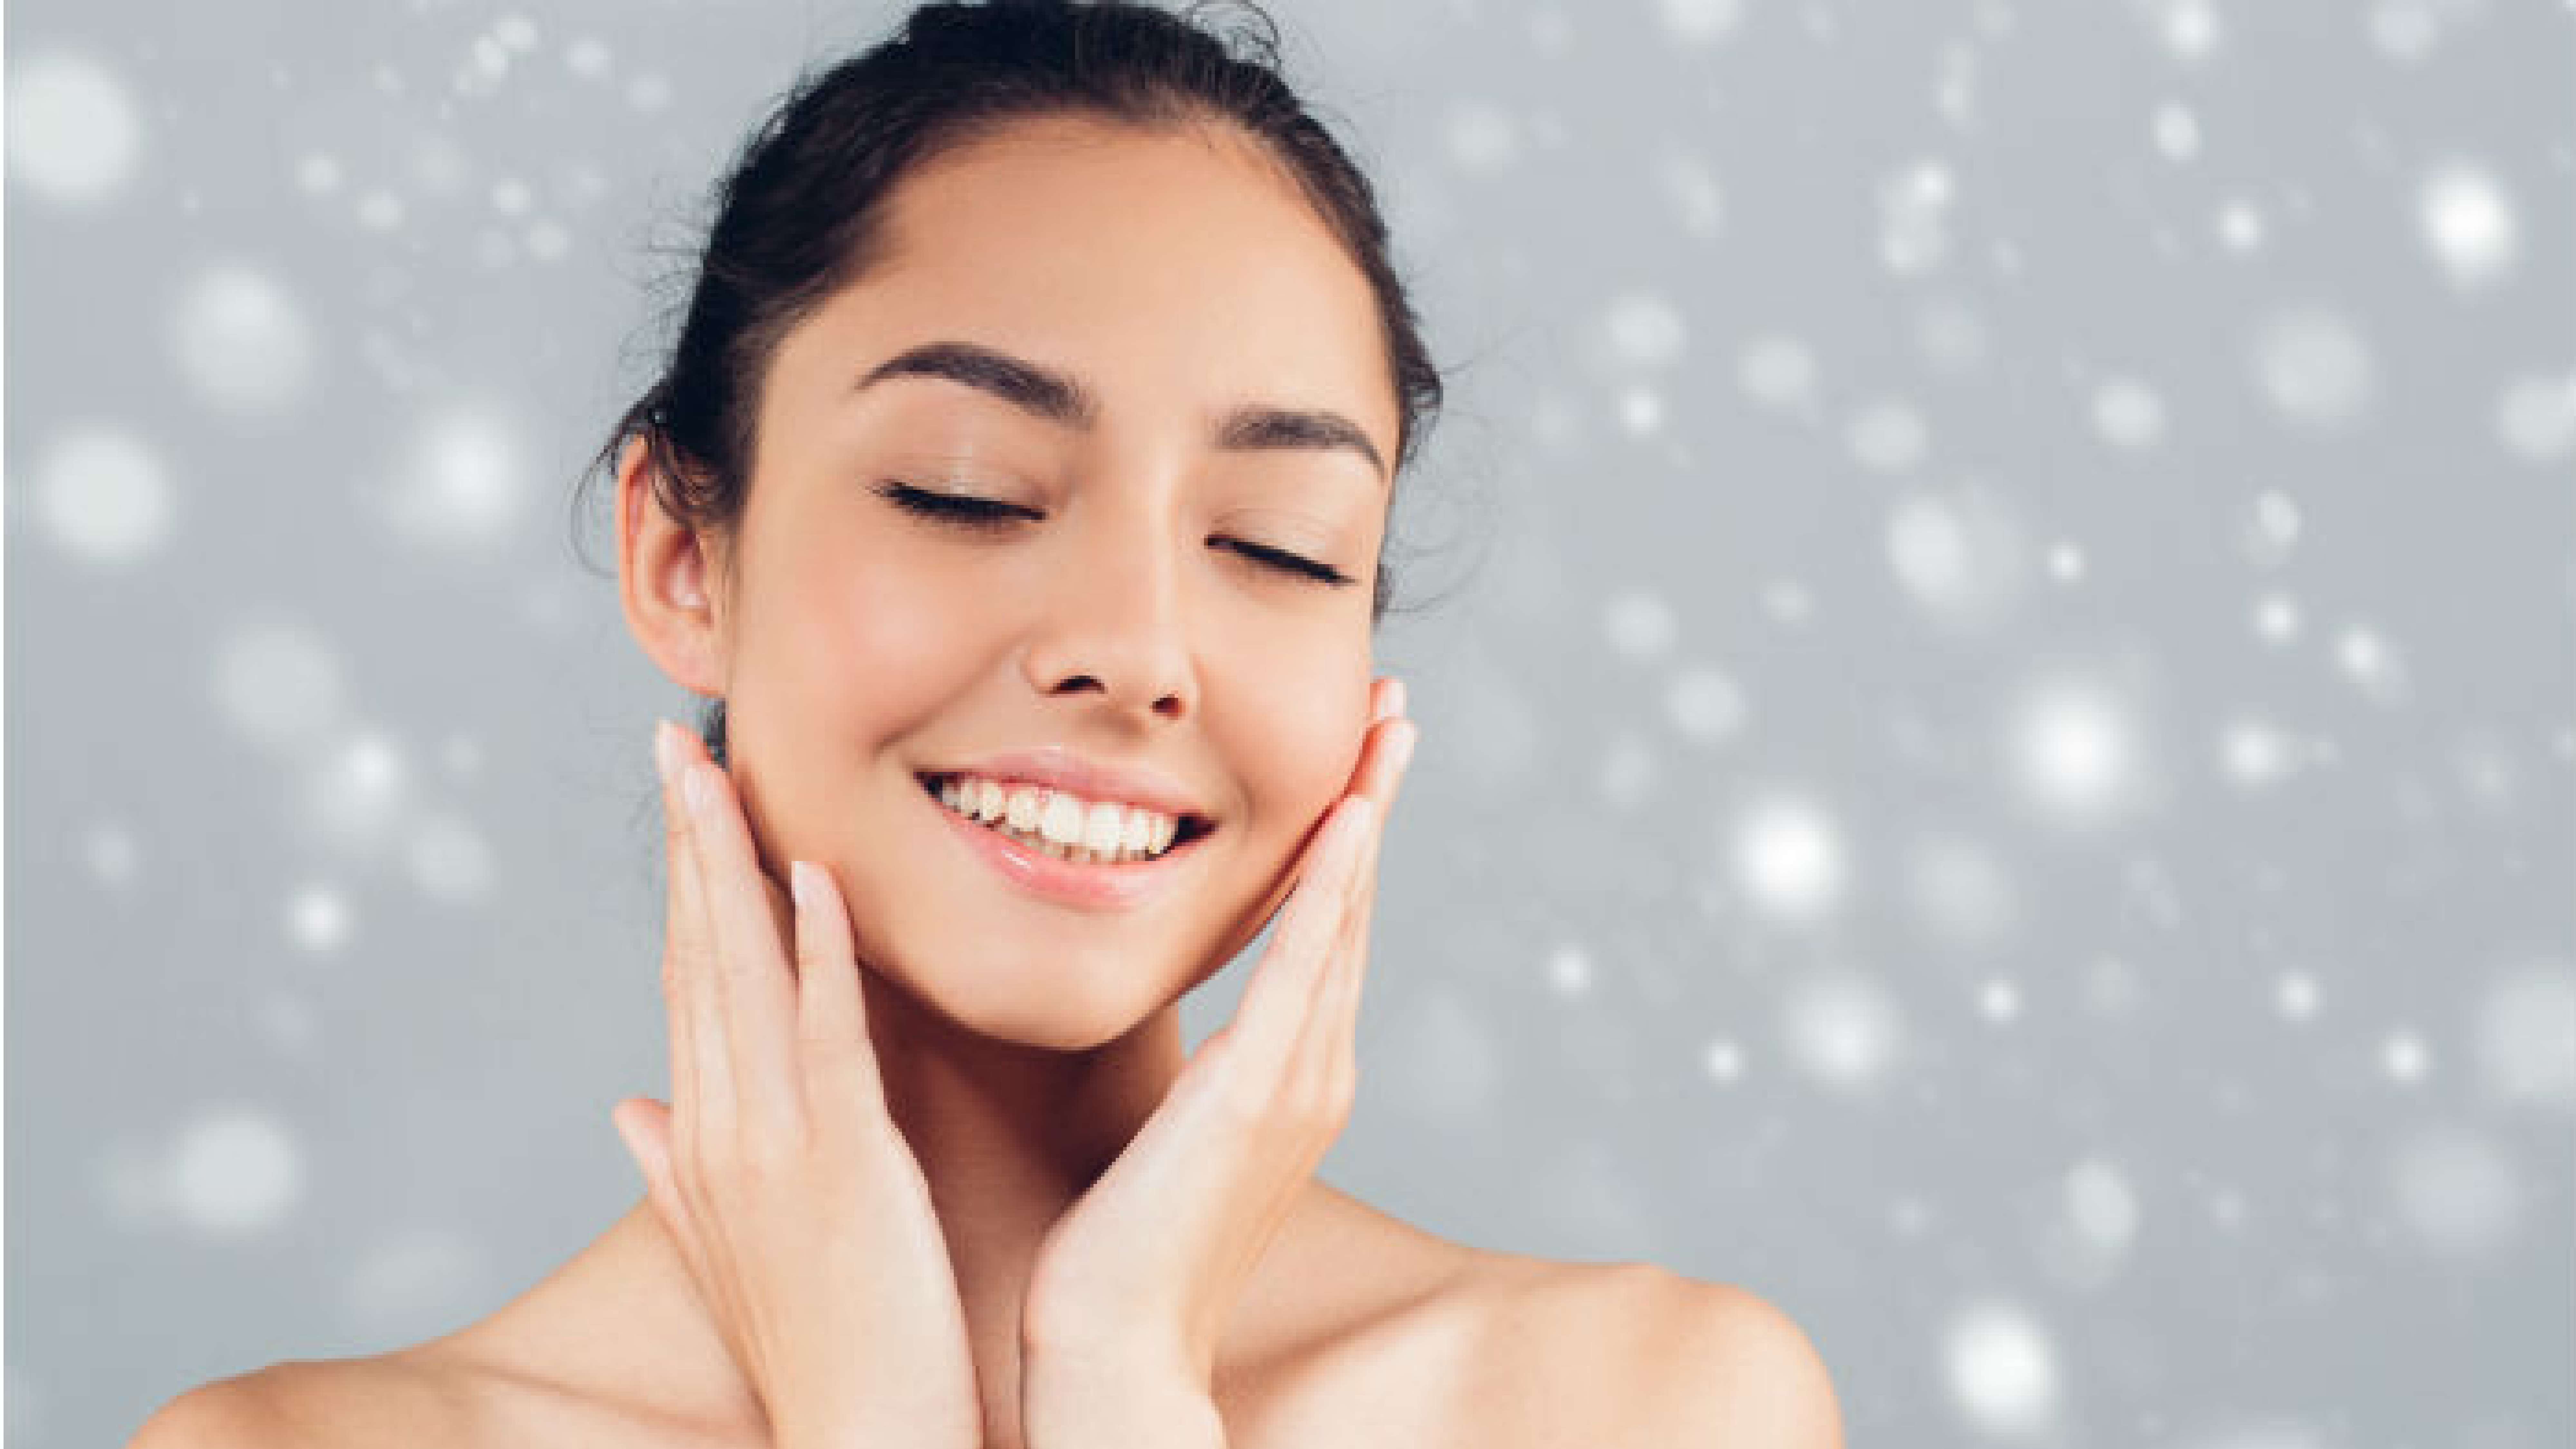 Get ready for winters with the help of these winter skincare tips